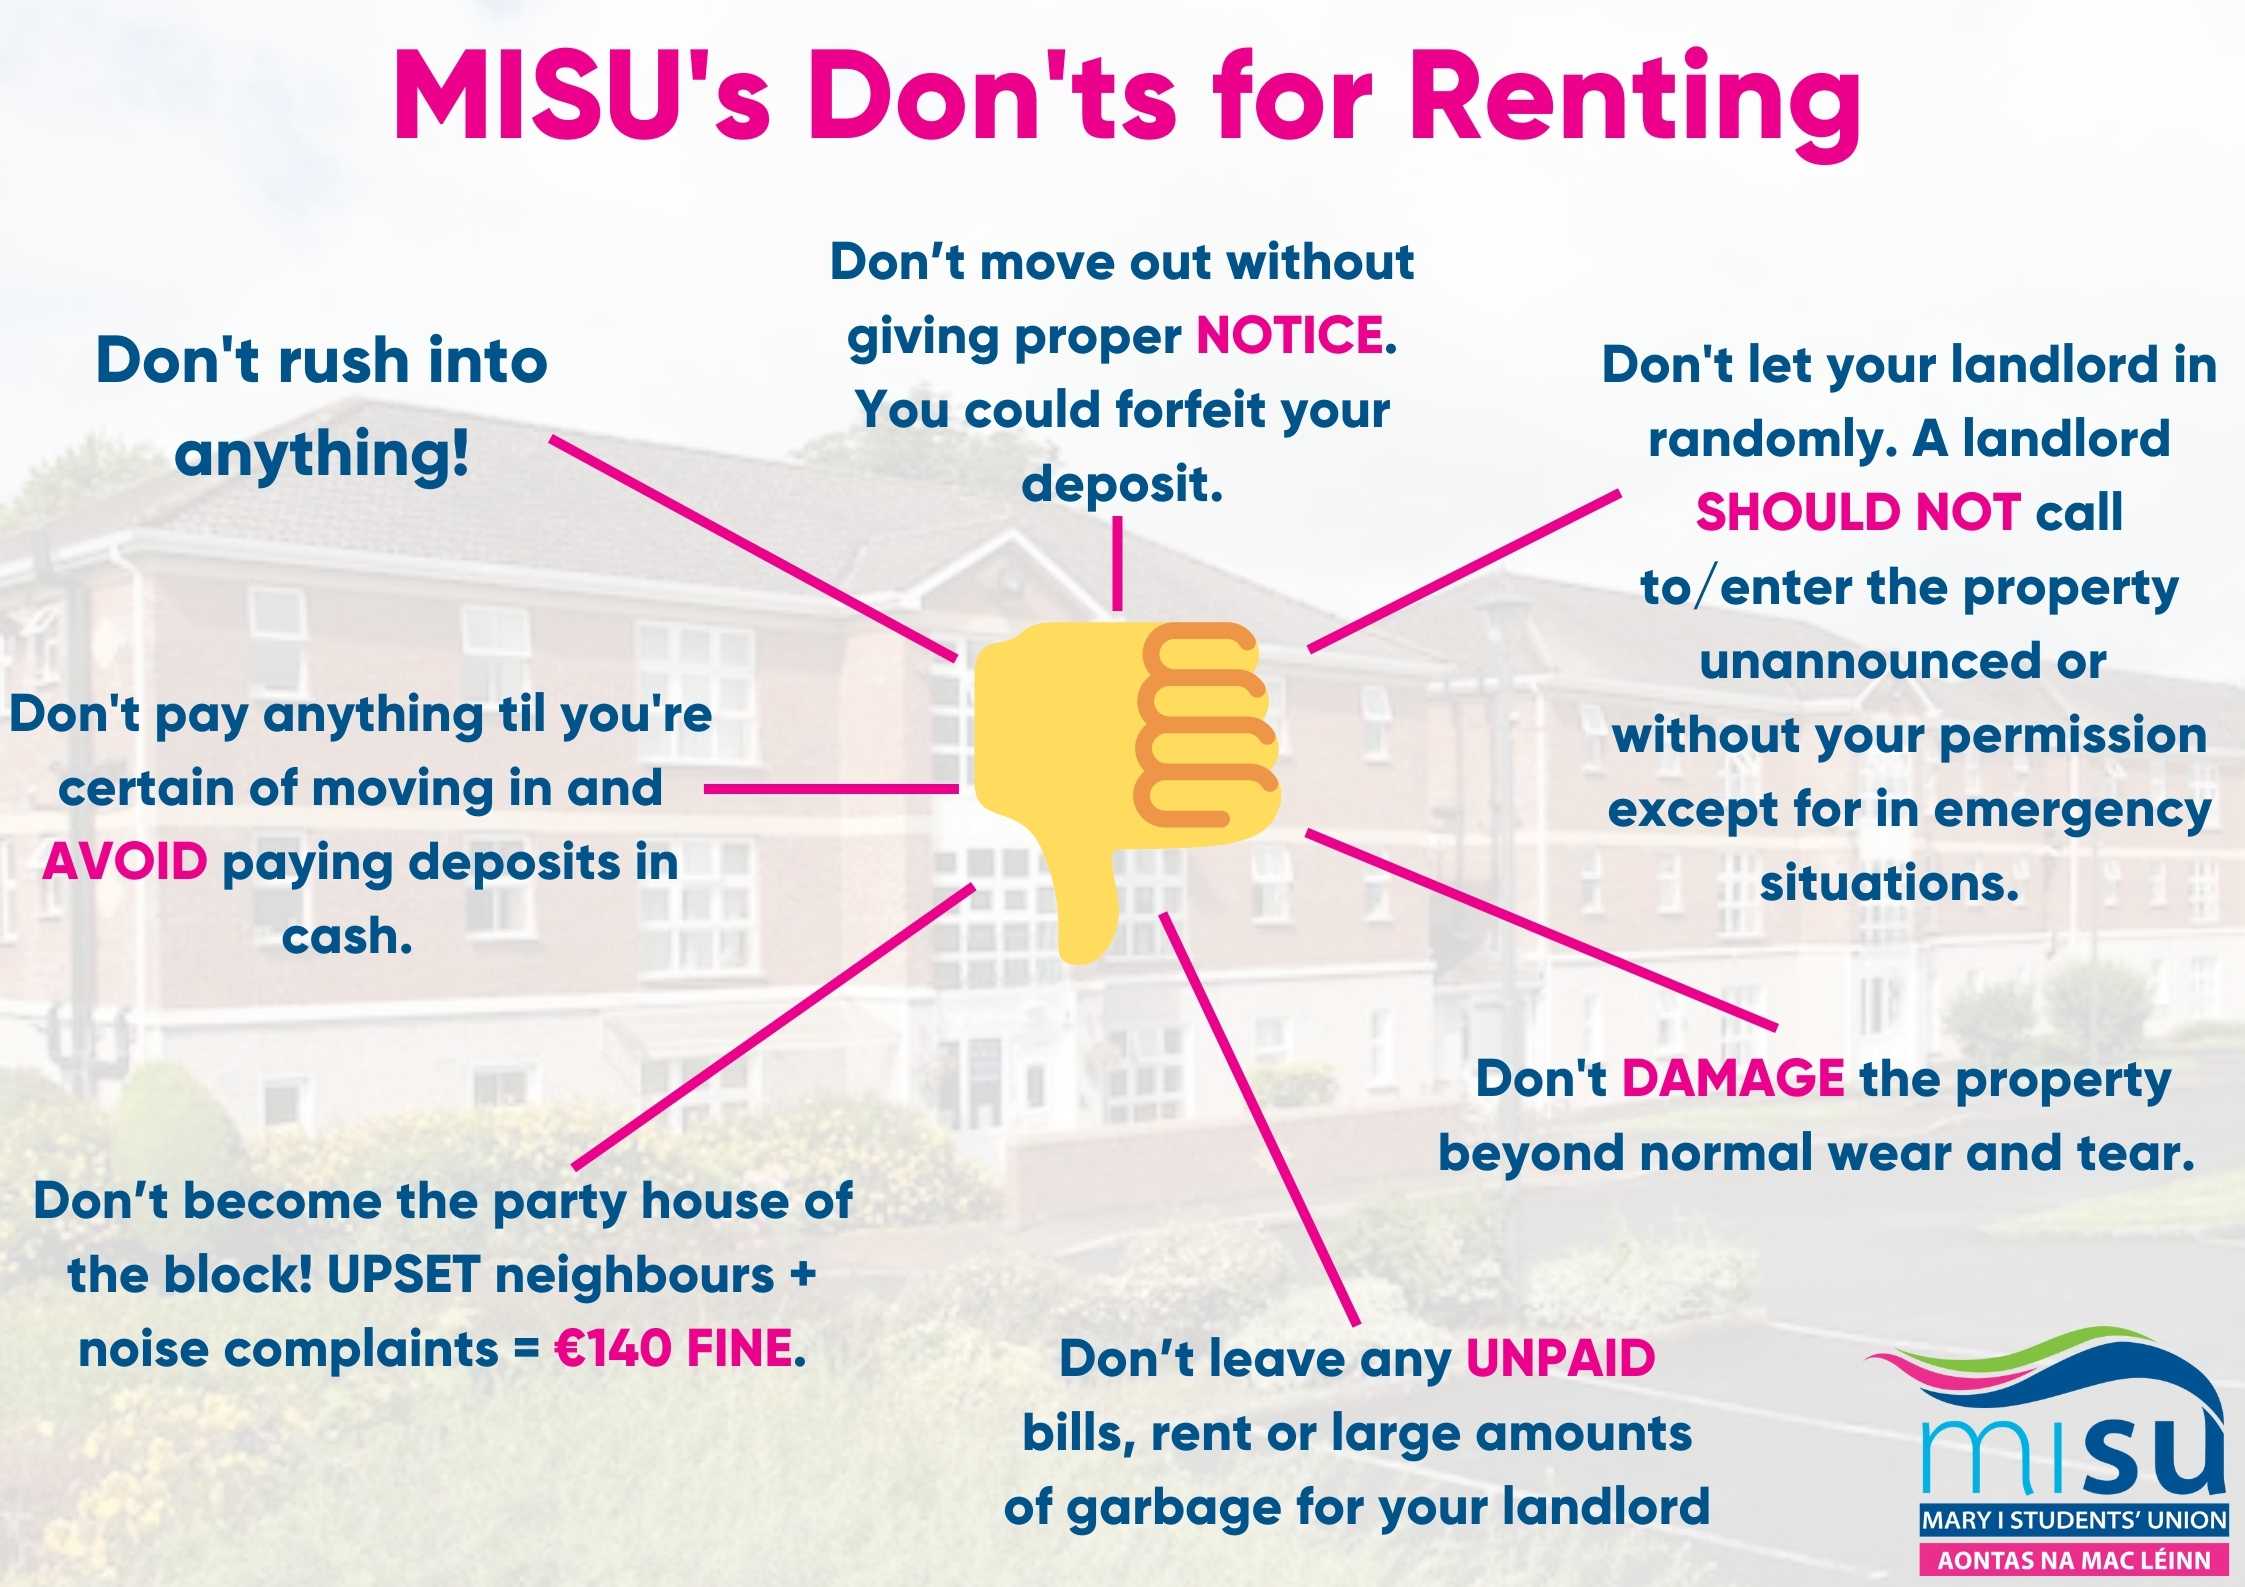 MISUs Donts for Renting